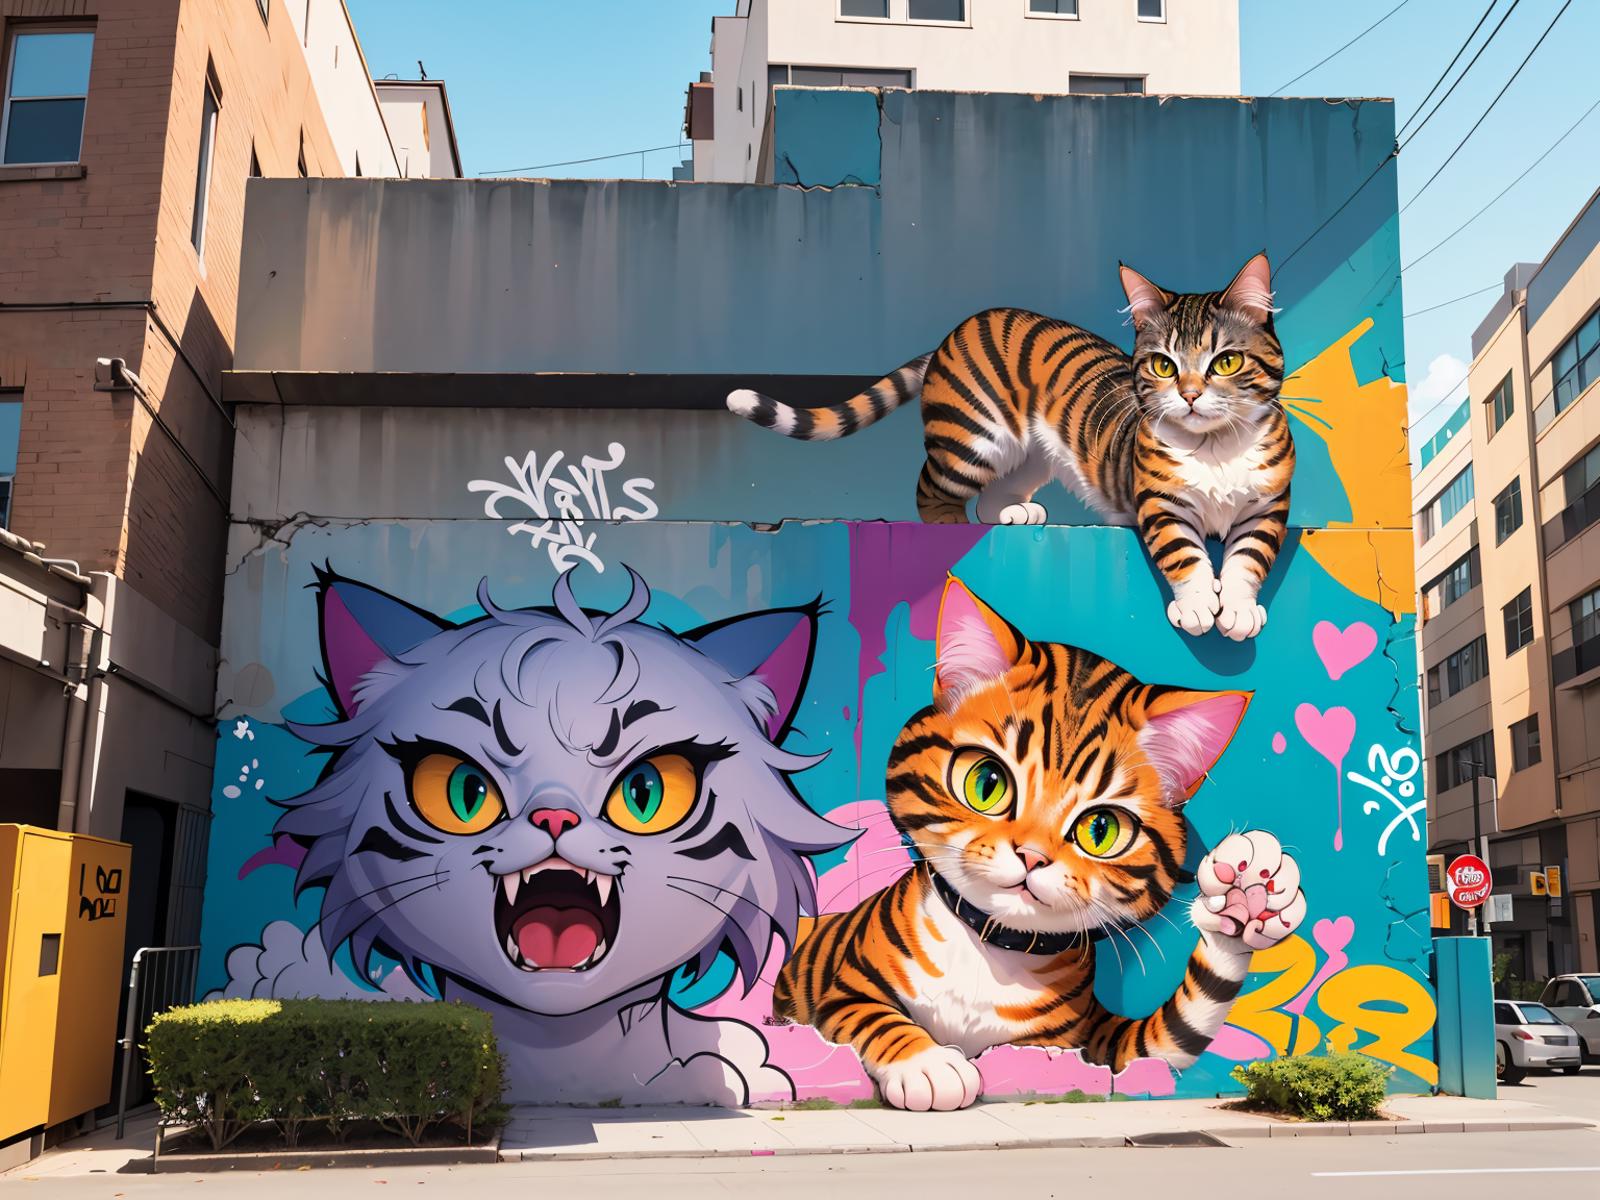 A wall of a building painted with a tiger cat and two other cats with painted claws.